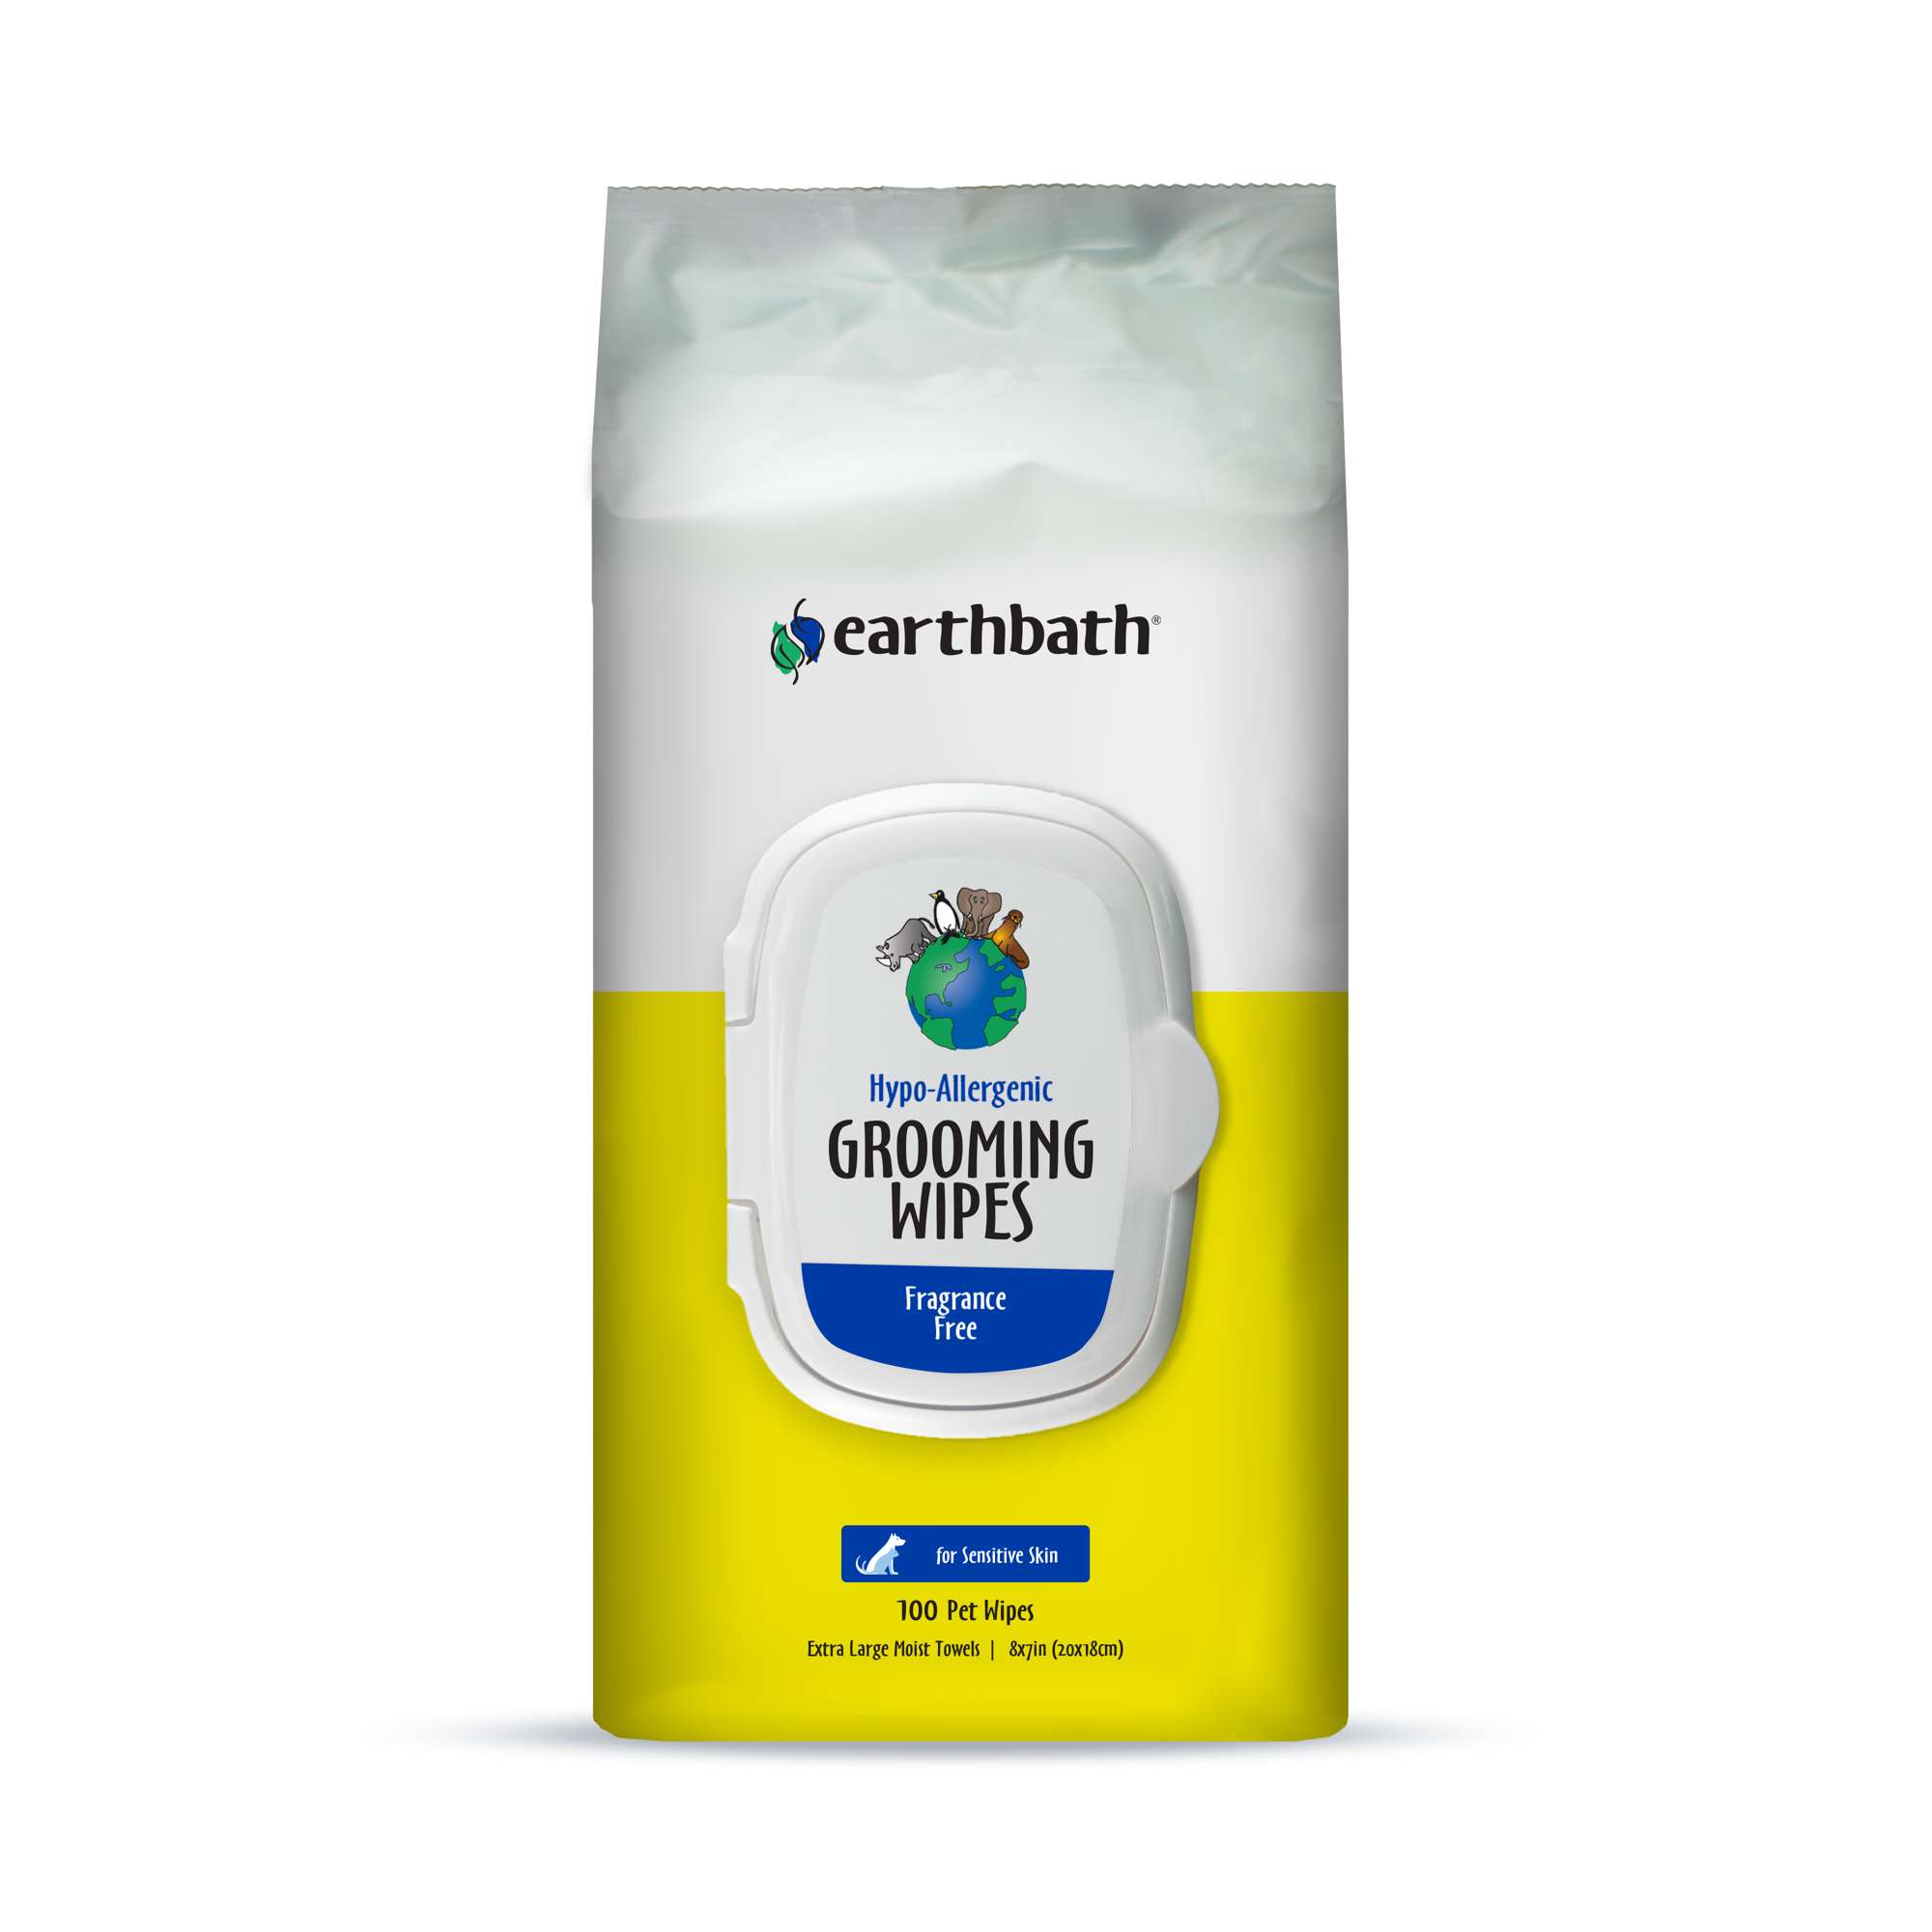 Photos - Aquarium Lighting Earthbath Hypo-Allergenic and Fragrance Free Grooming Wipes for 